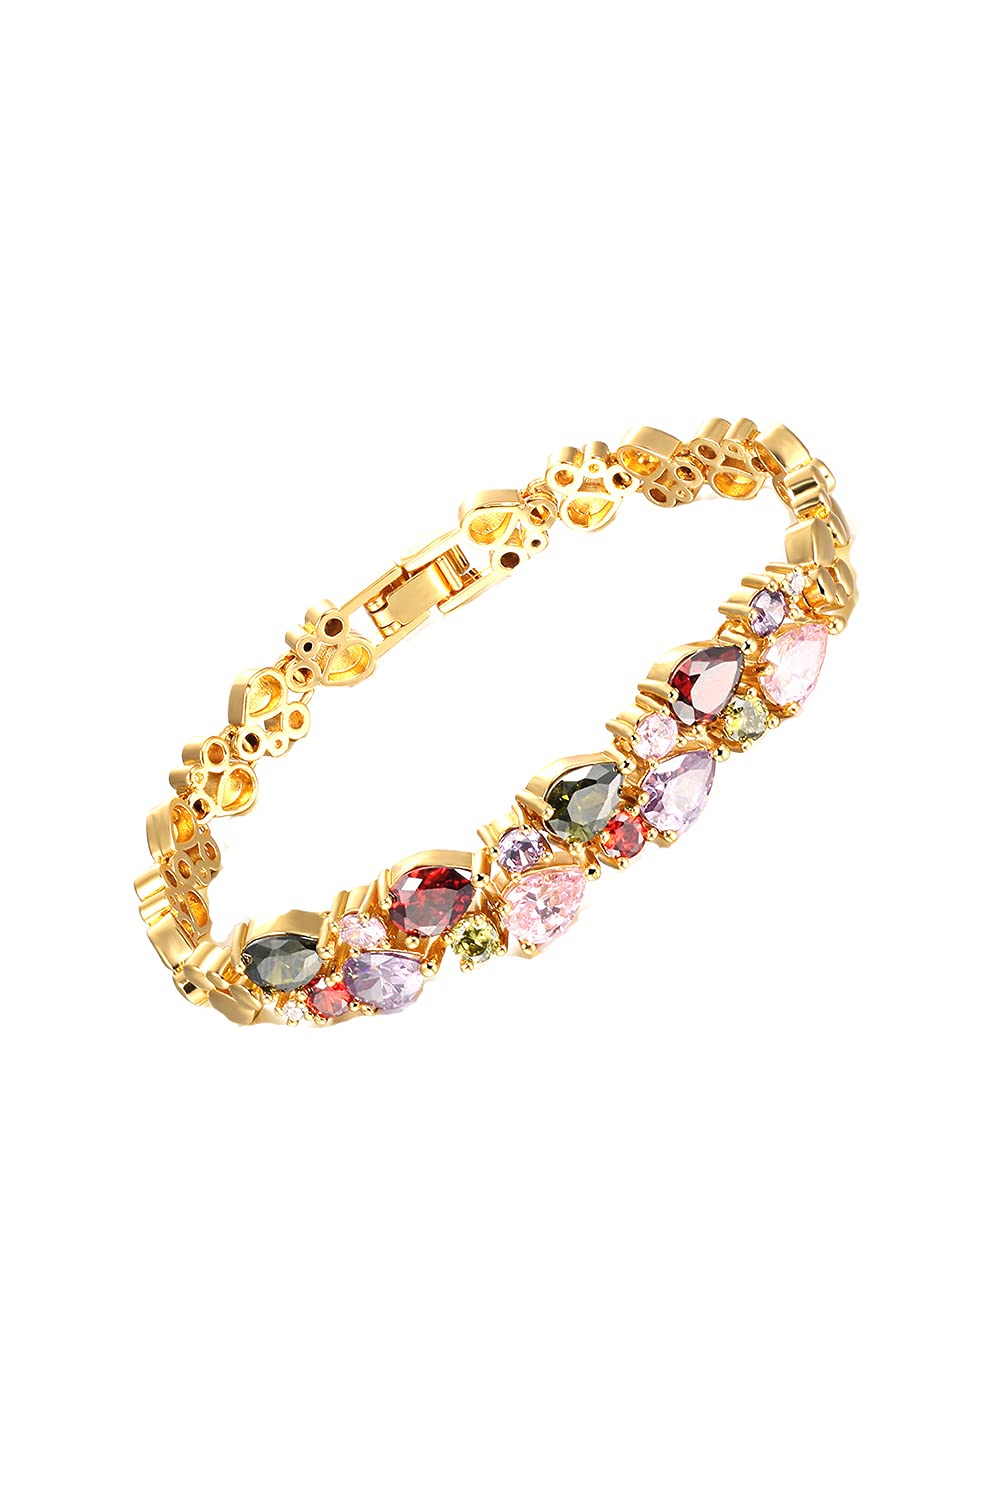 Yellow Chimes Swiss Cubic Zirconia 18K Gold Plated Bracelet for Girls and Women